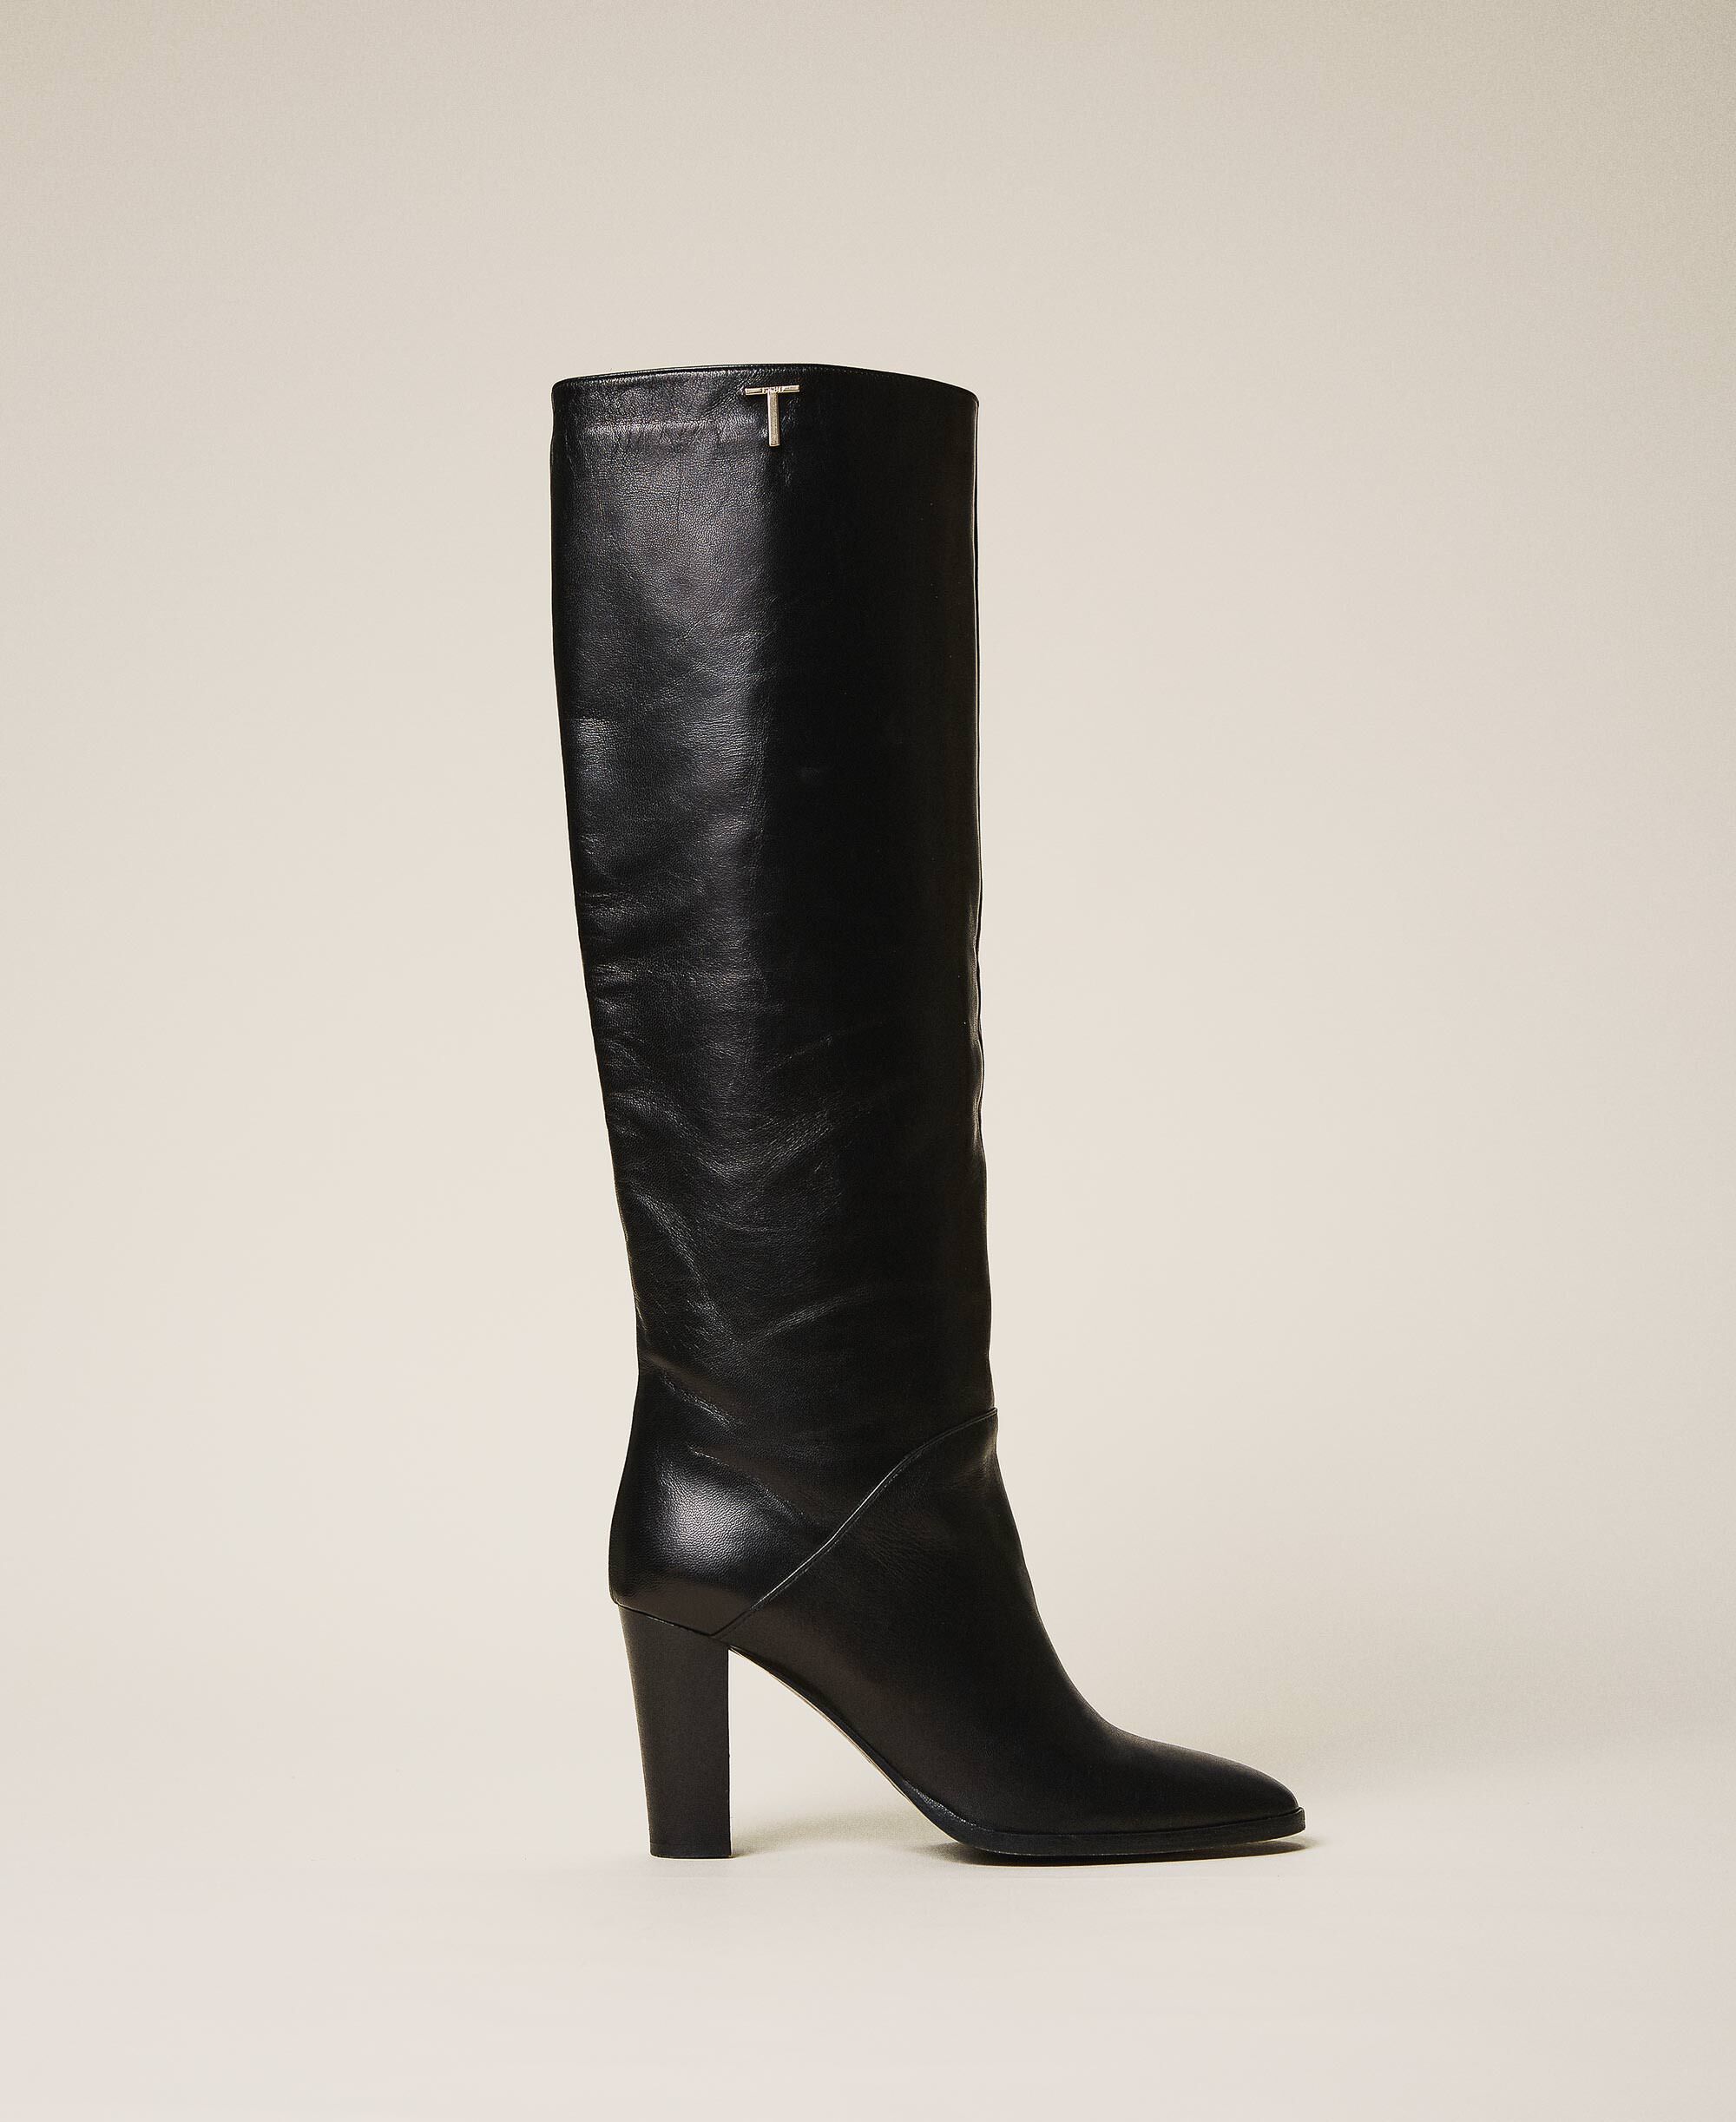 Leather high boots Woman, Black | TWINSET Milano